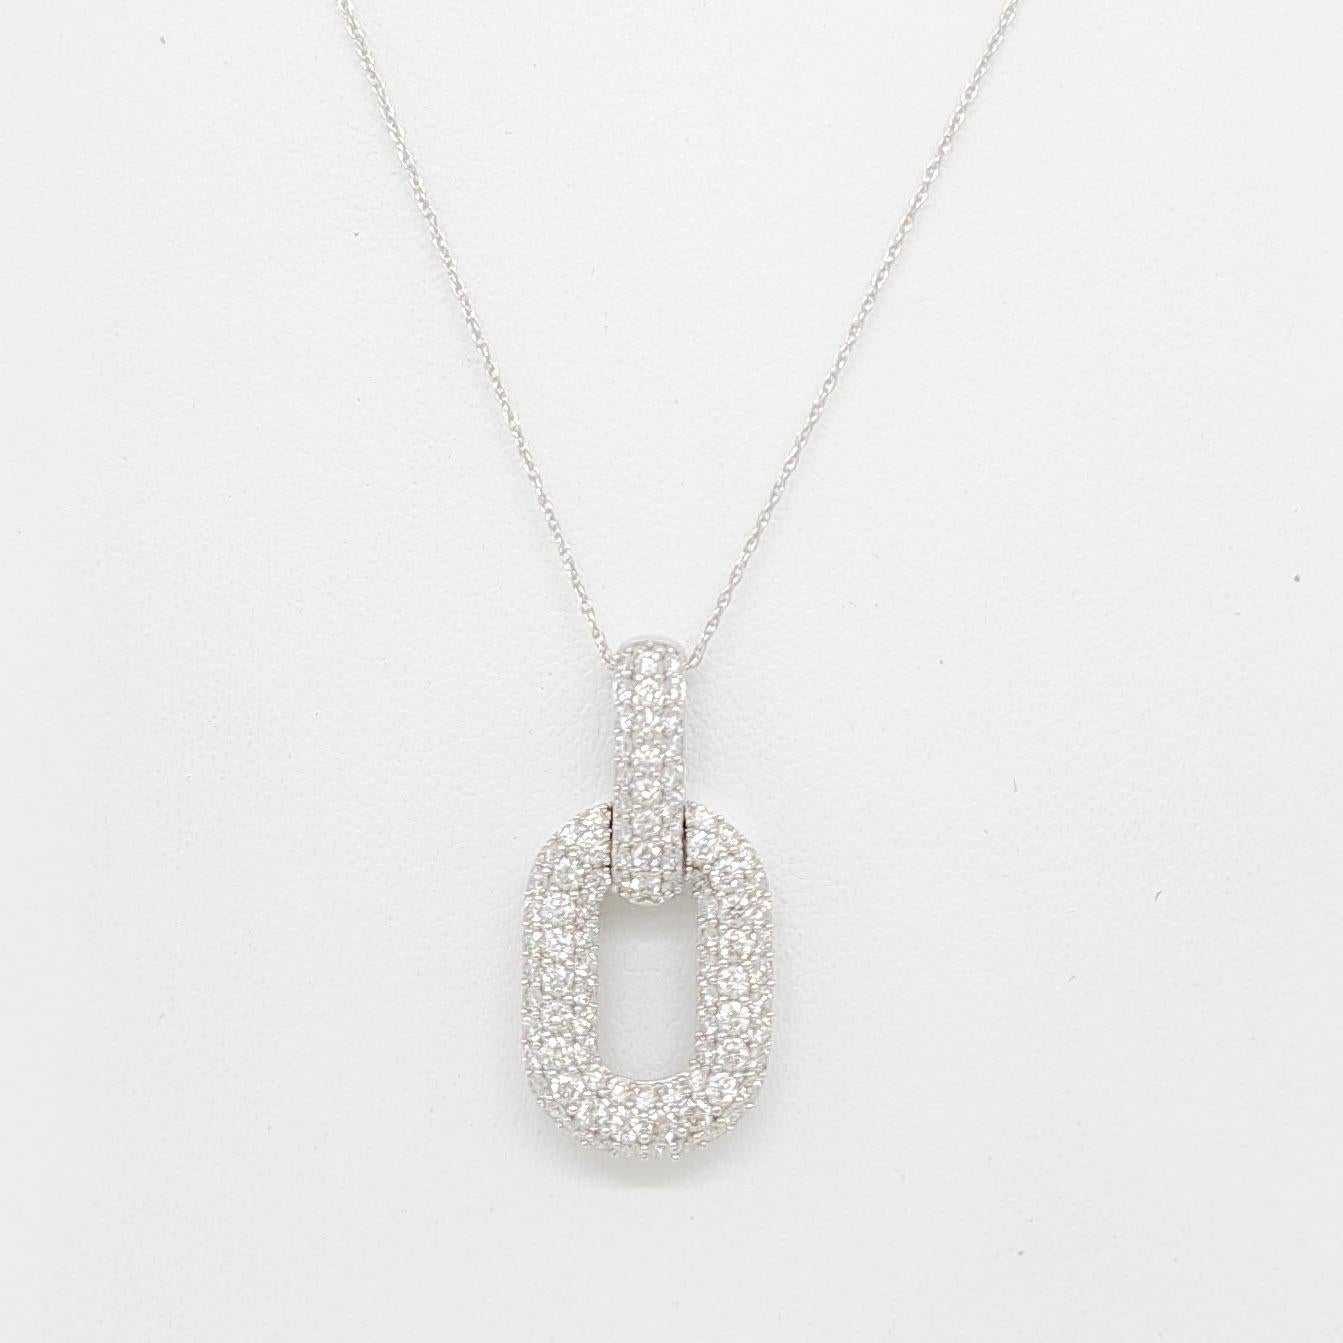 Gorgeous 1.50 ct. of good quality, white, and bright diamonds in this modern yet classy pendant necklace.  Handmade in 14k white gold.  Length is 18